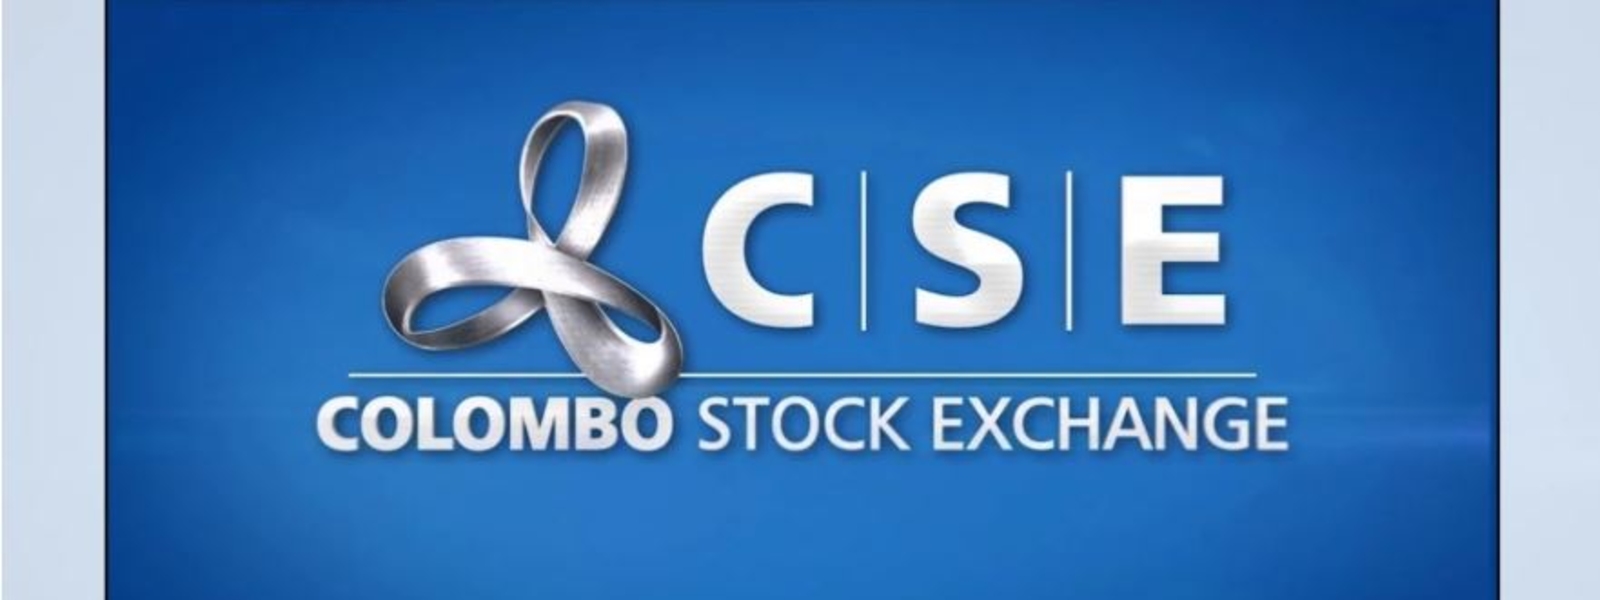 Turnover of the Stock Market exceeds Rs. 3 billion